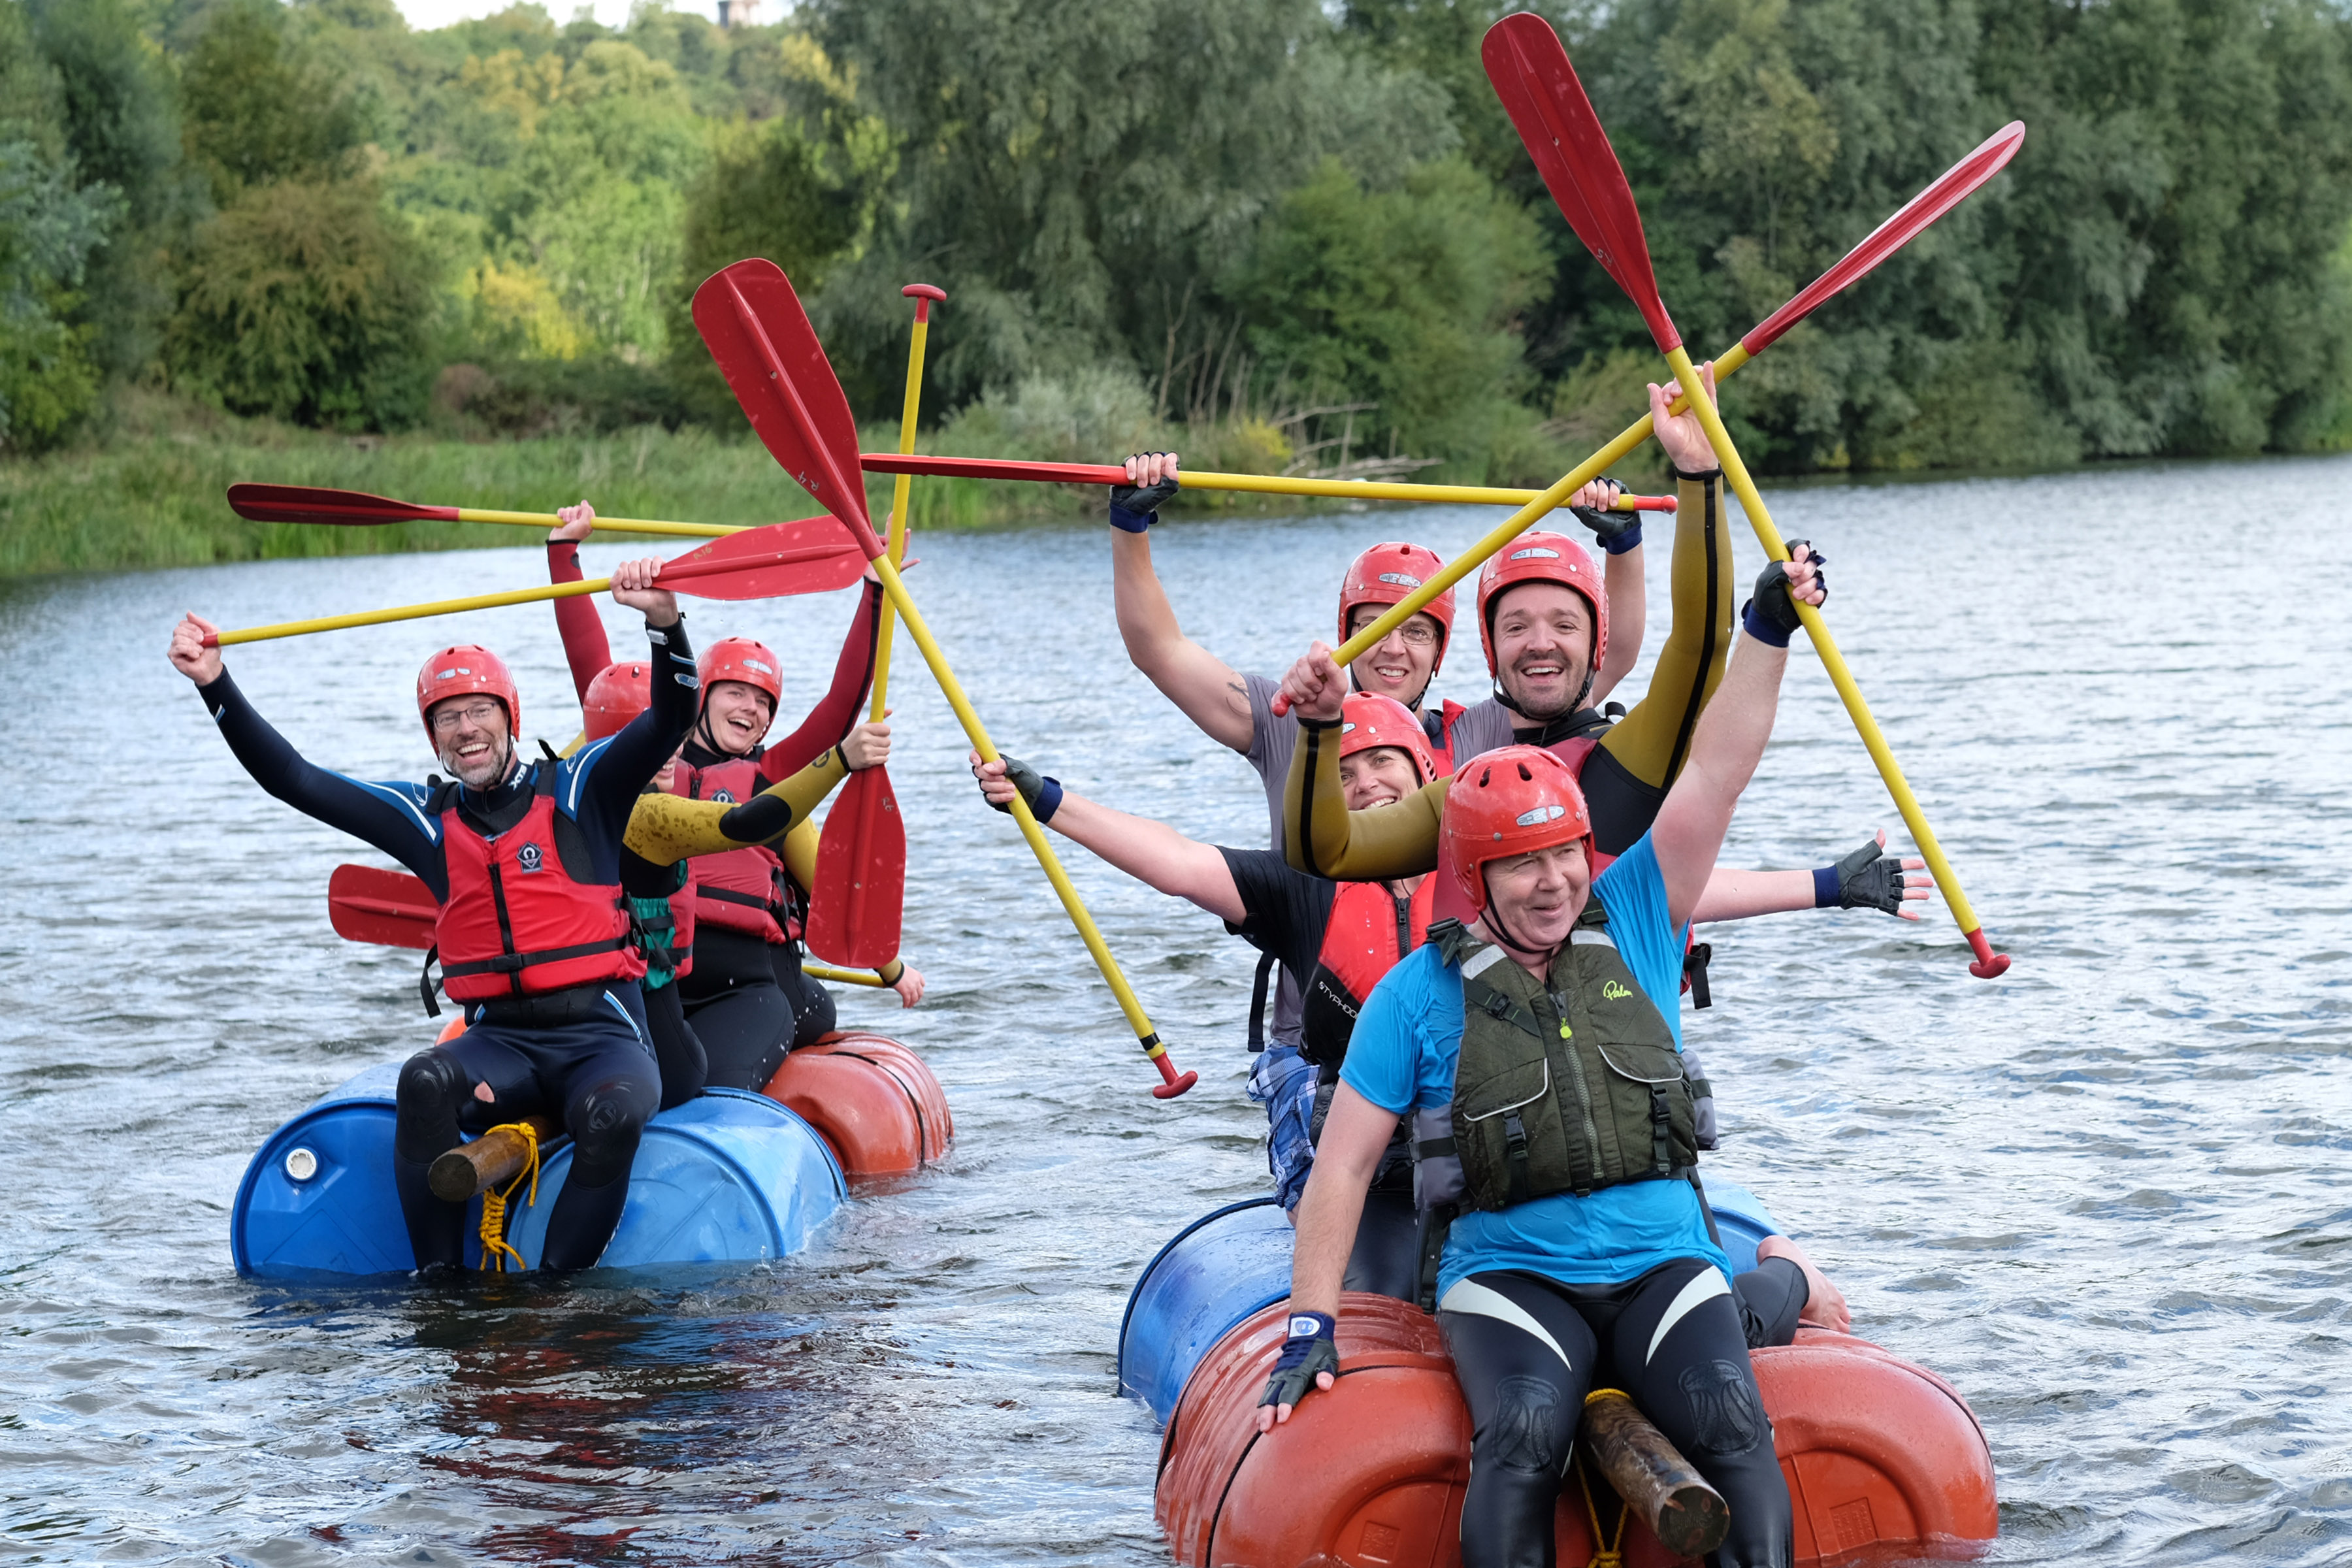 Teams tackle water challenge for Boudicca Appeal